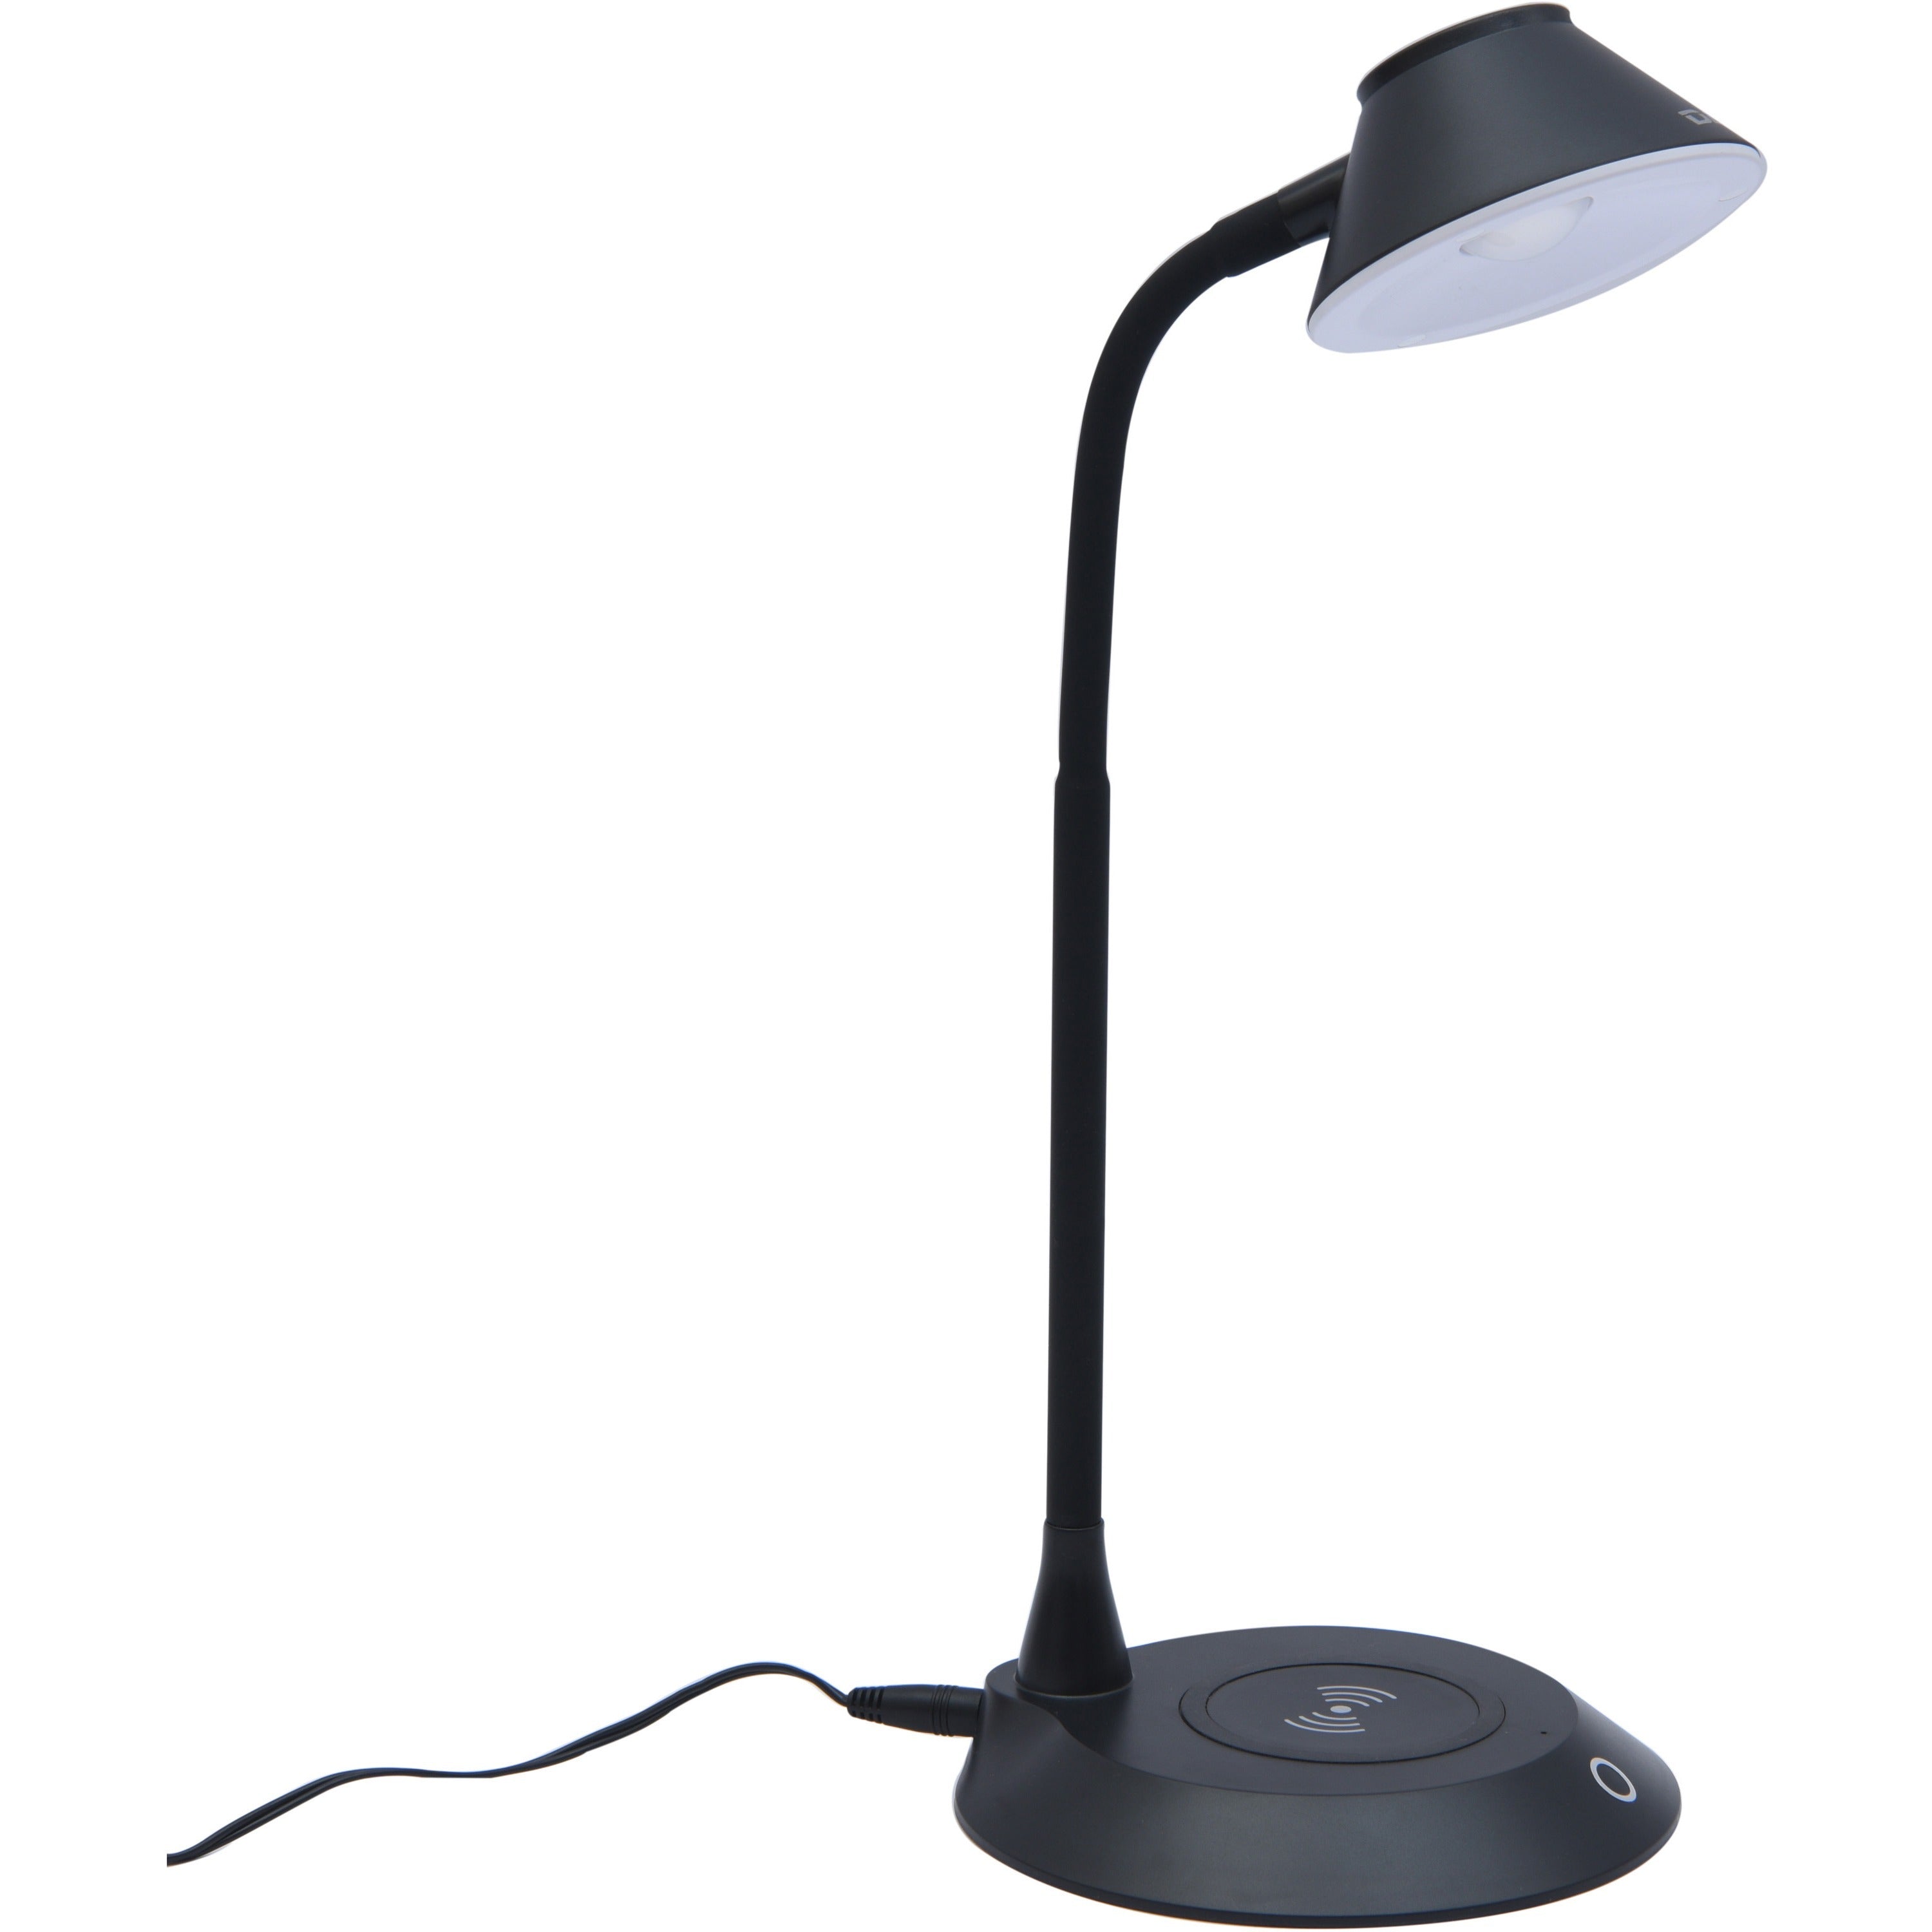 data-accessories-company-mp-323-led-desk-lamp-5-w-led-bulb-adjustable-brightness-qi-wireless-charging-flicker-free-glare-free-light-dimmable-touch-sensitive-control-panel-flexible-neck-desk-mountable-black-for-desk-phone_dta02343 - 1